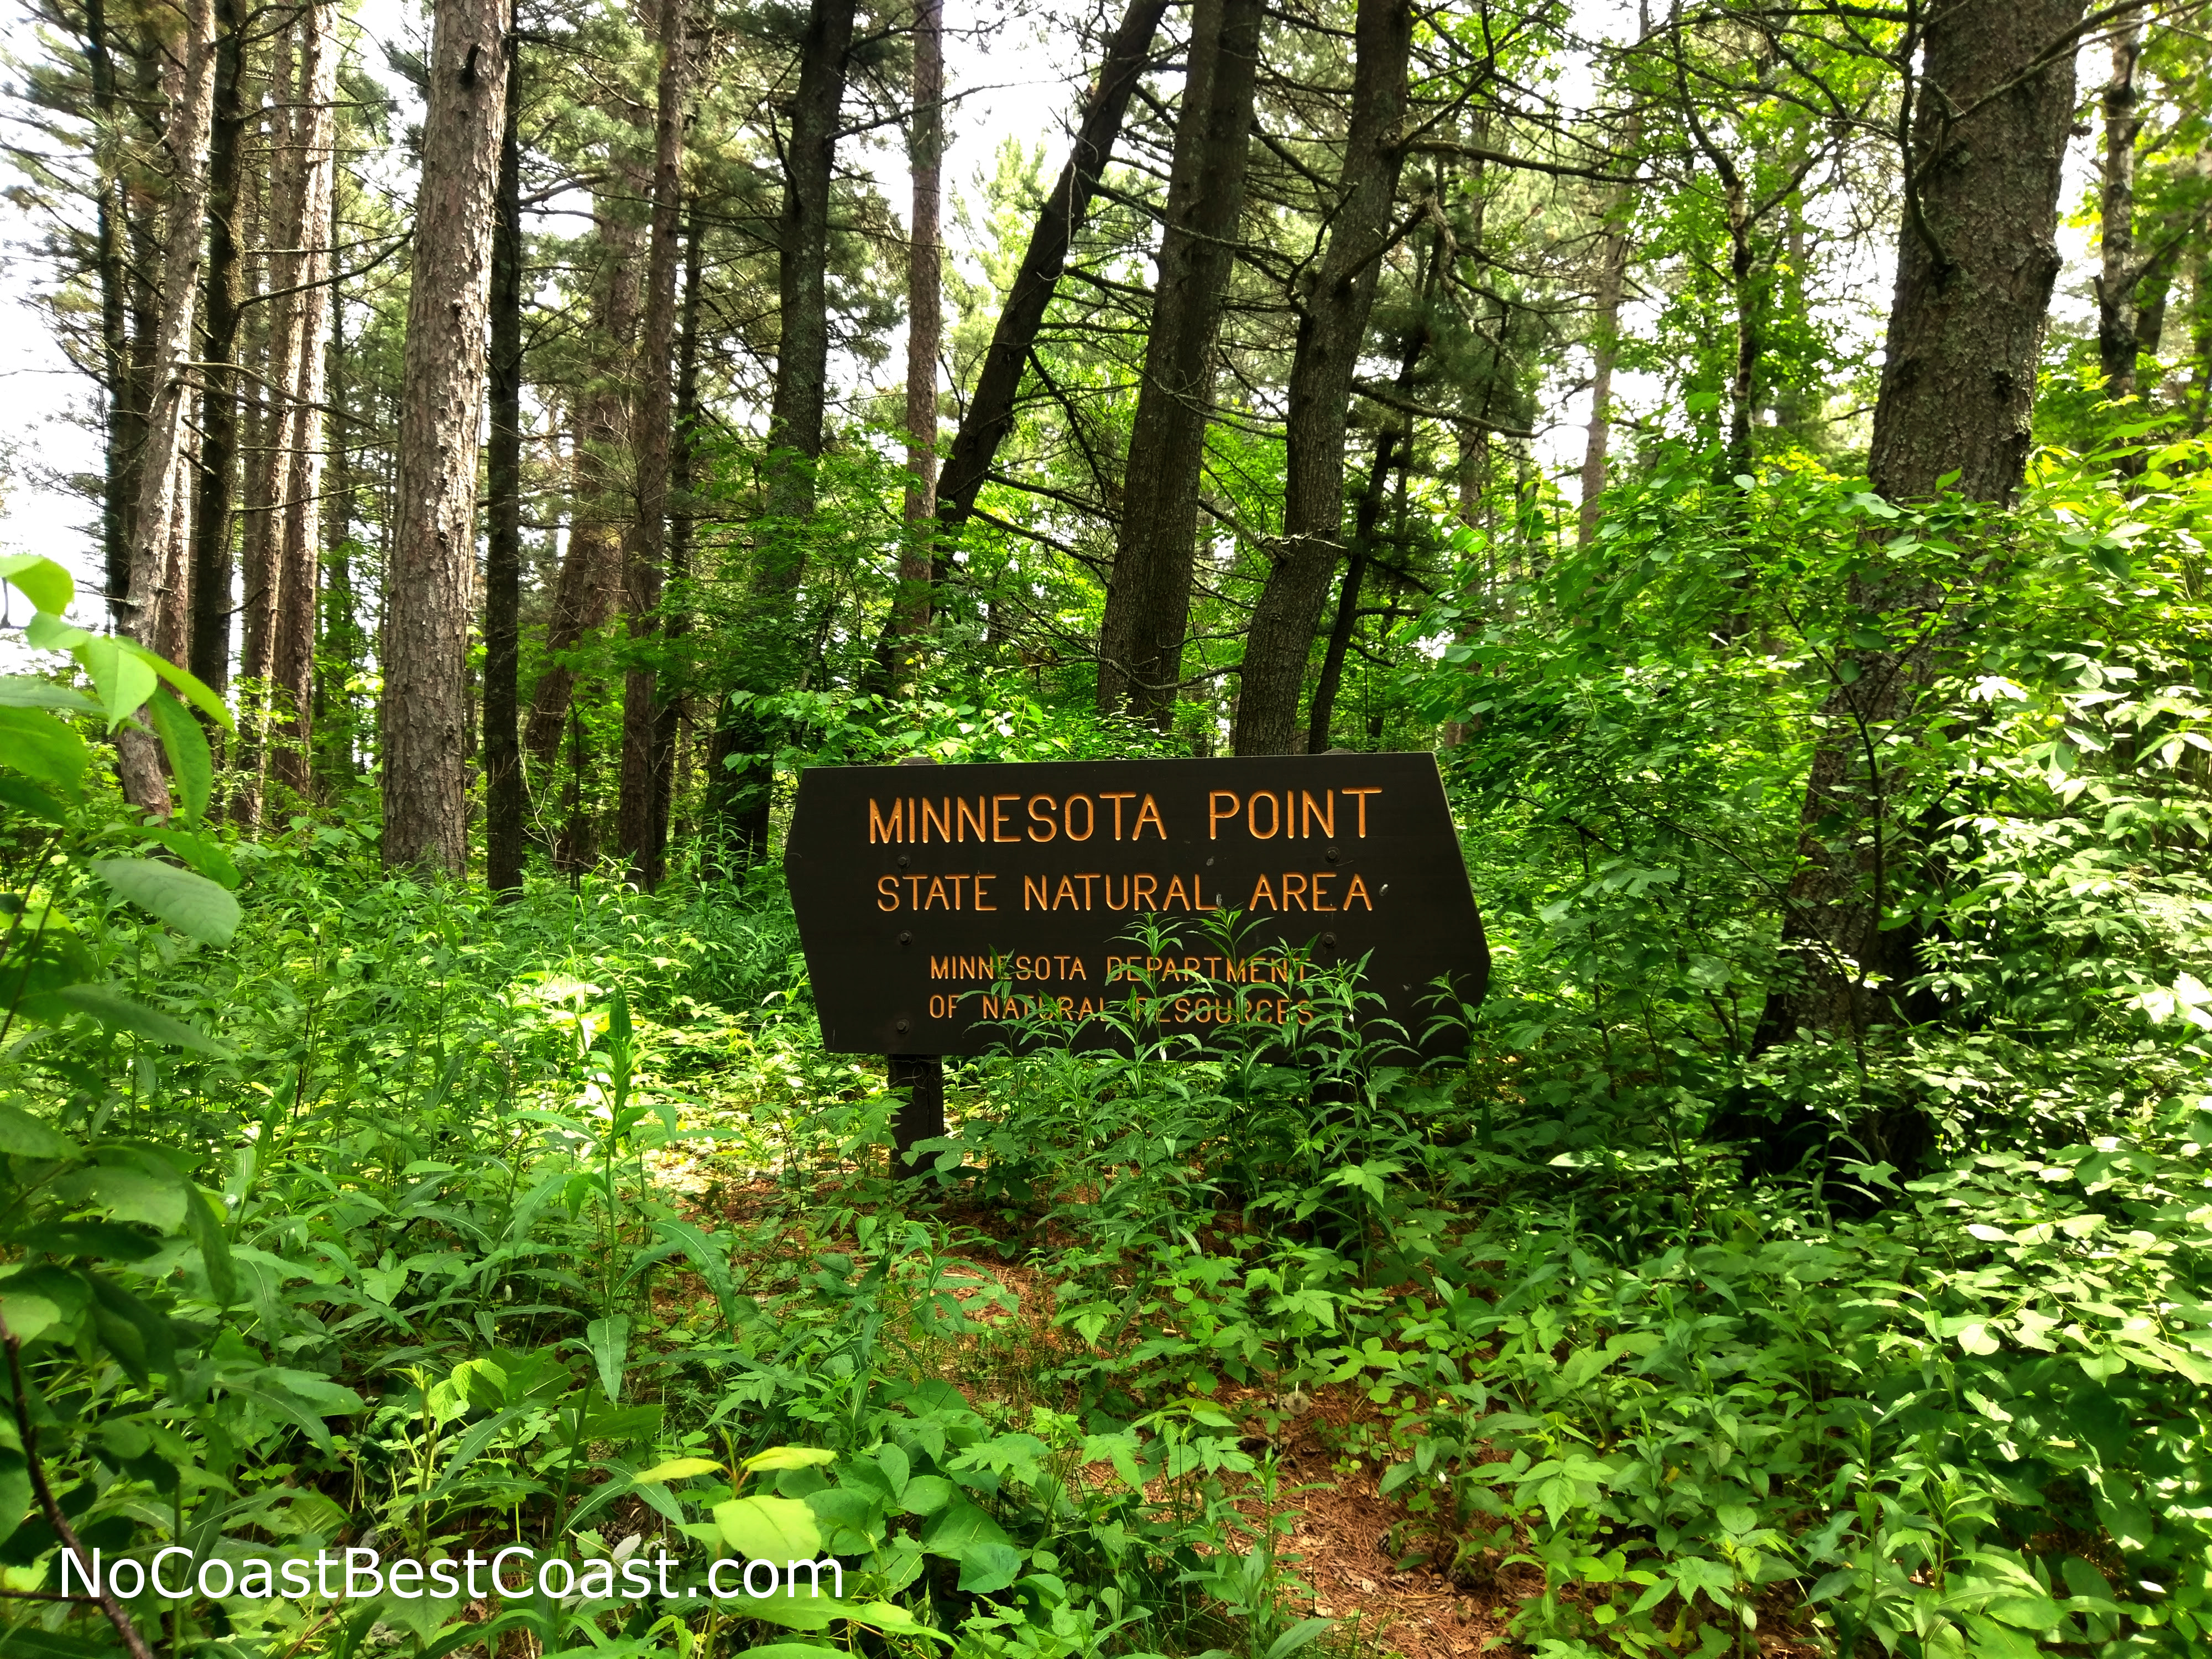 The sign marking entrance into the Minnesota Point State Natural Area